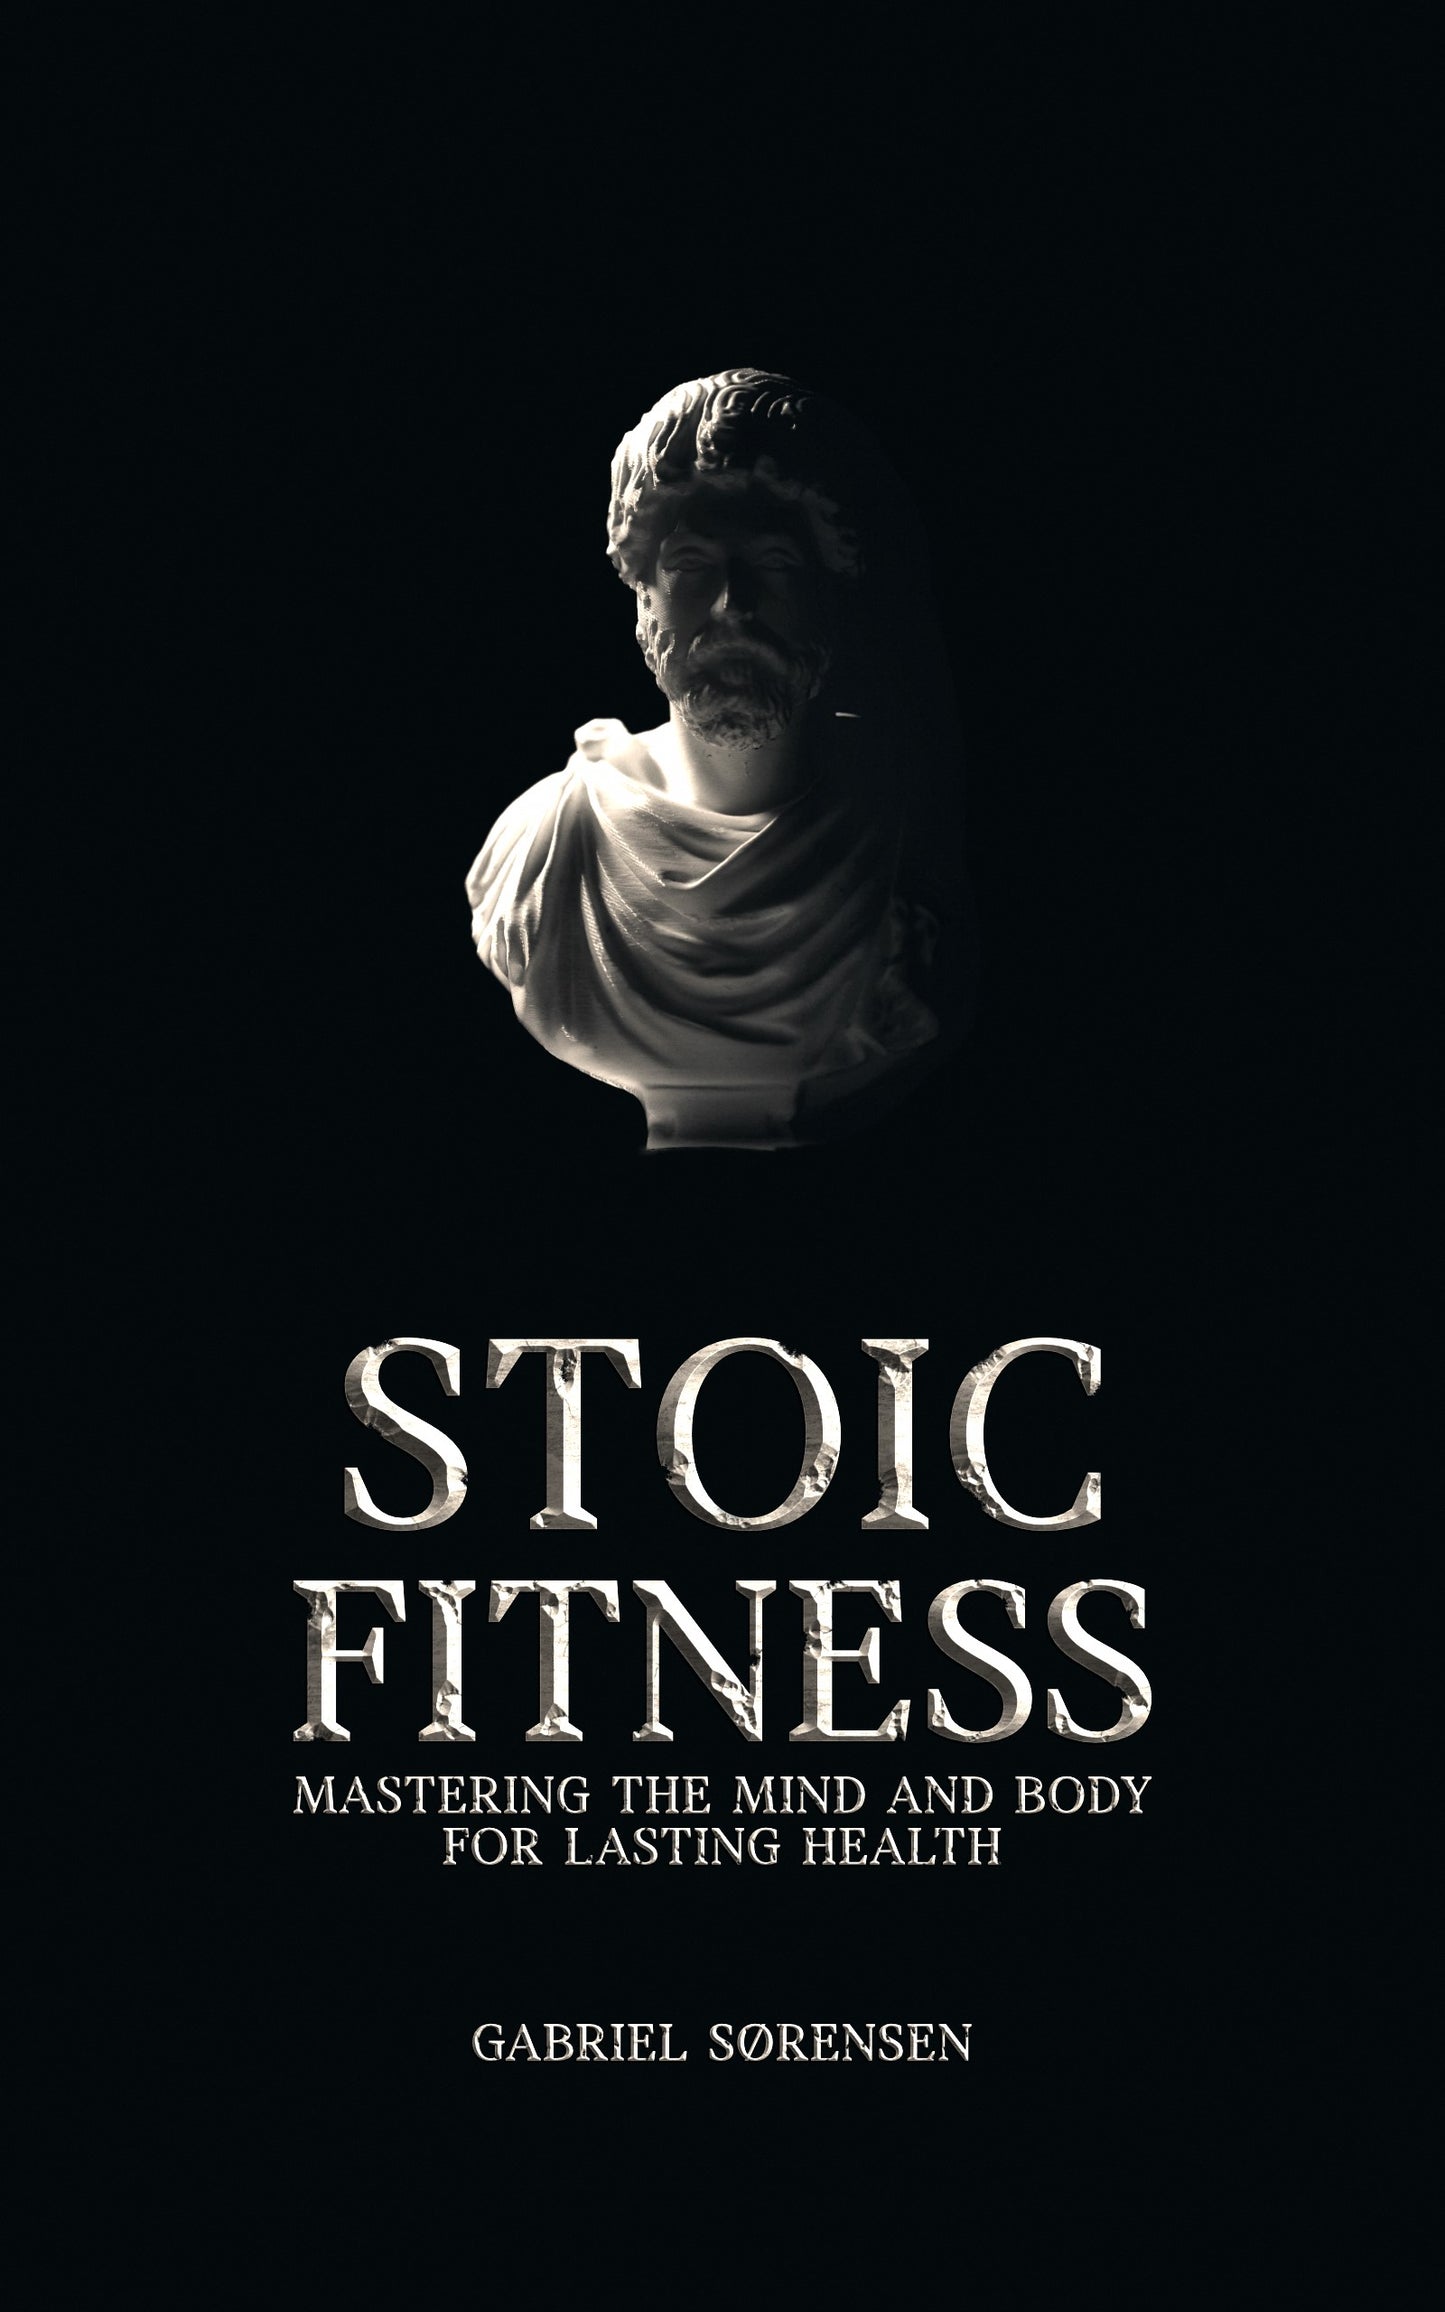 Stoic Fitness: Mastering the Mind and Body for Lasting Health